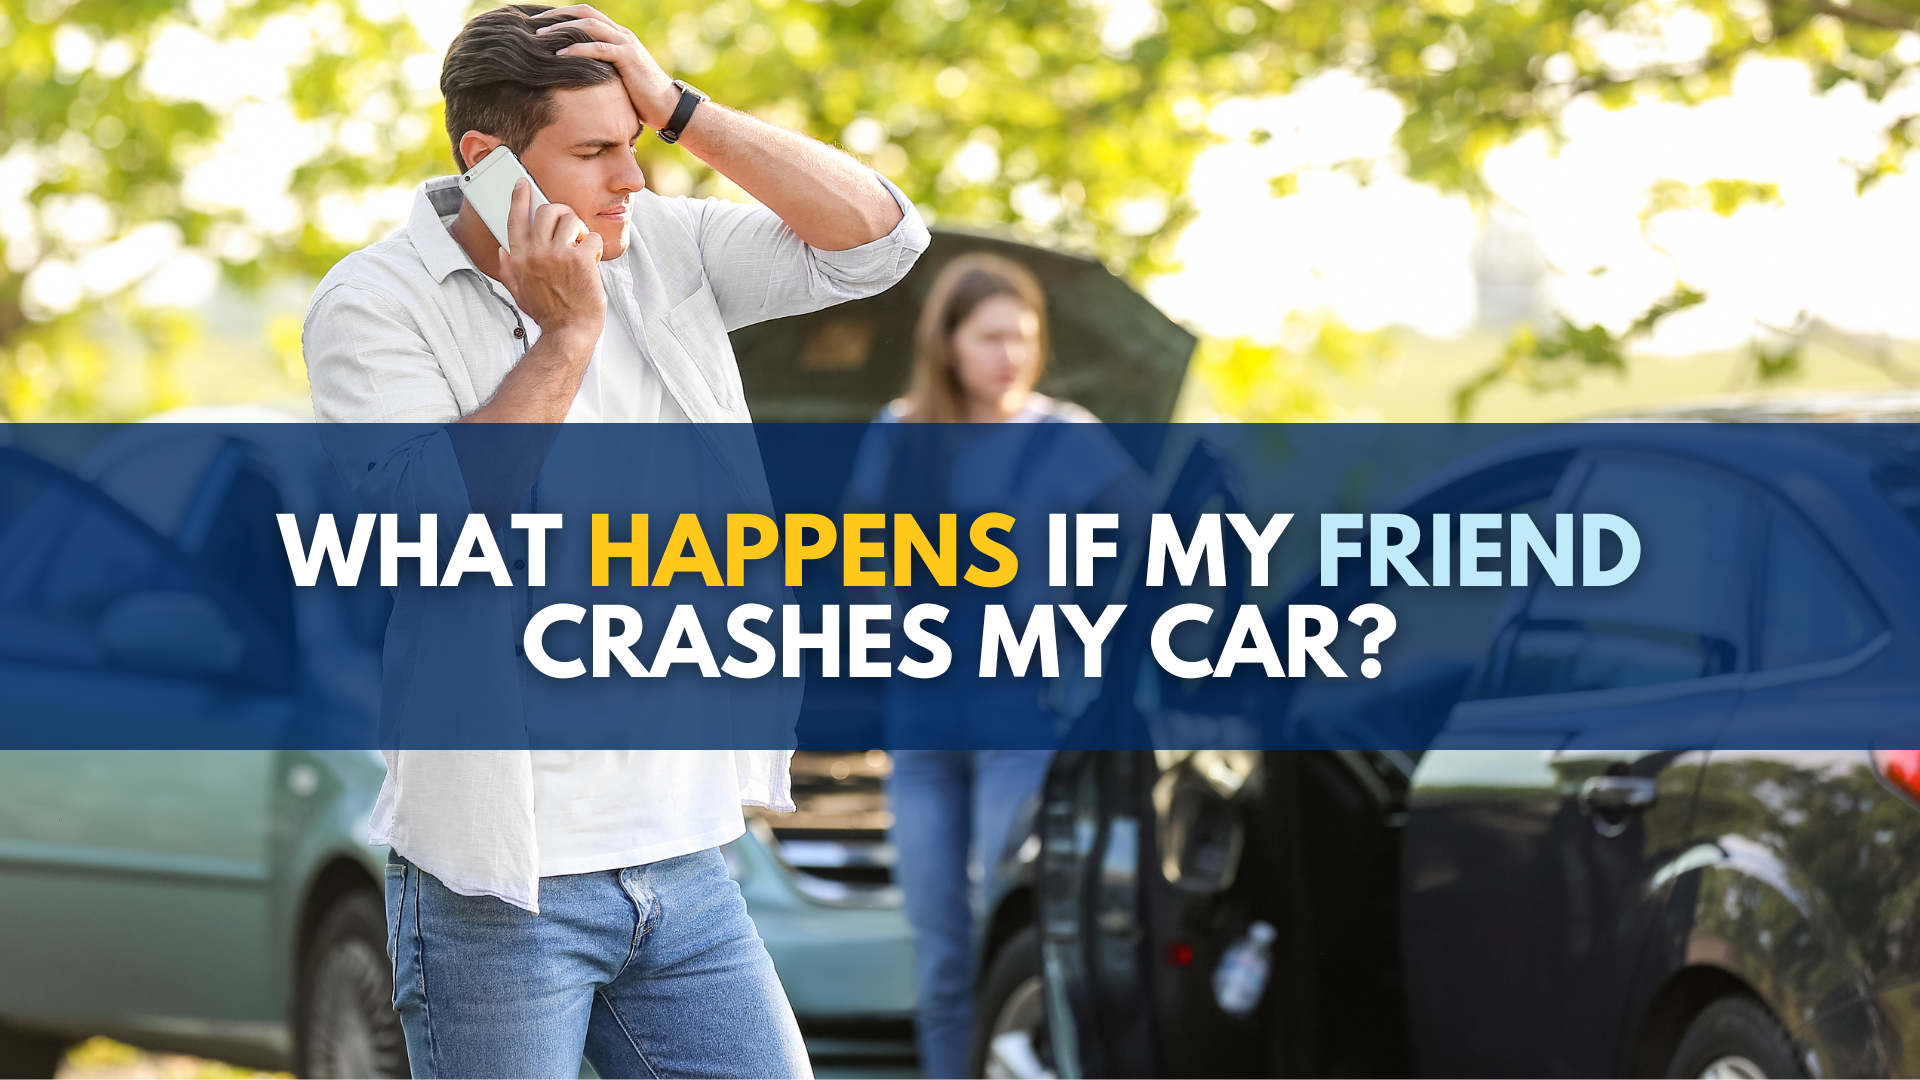 What happens if my friend crashes my car in Michigan?